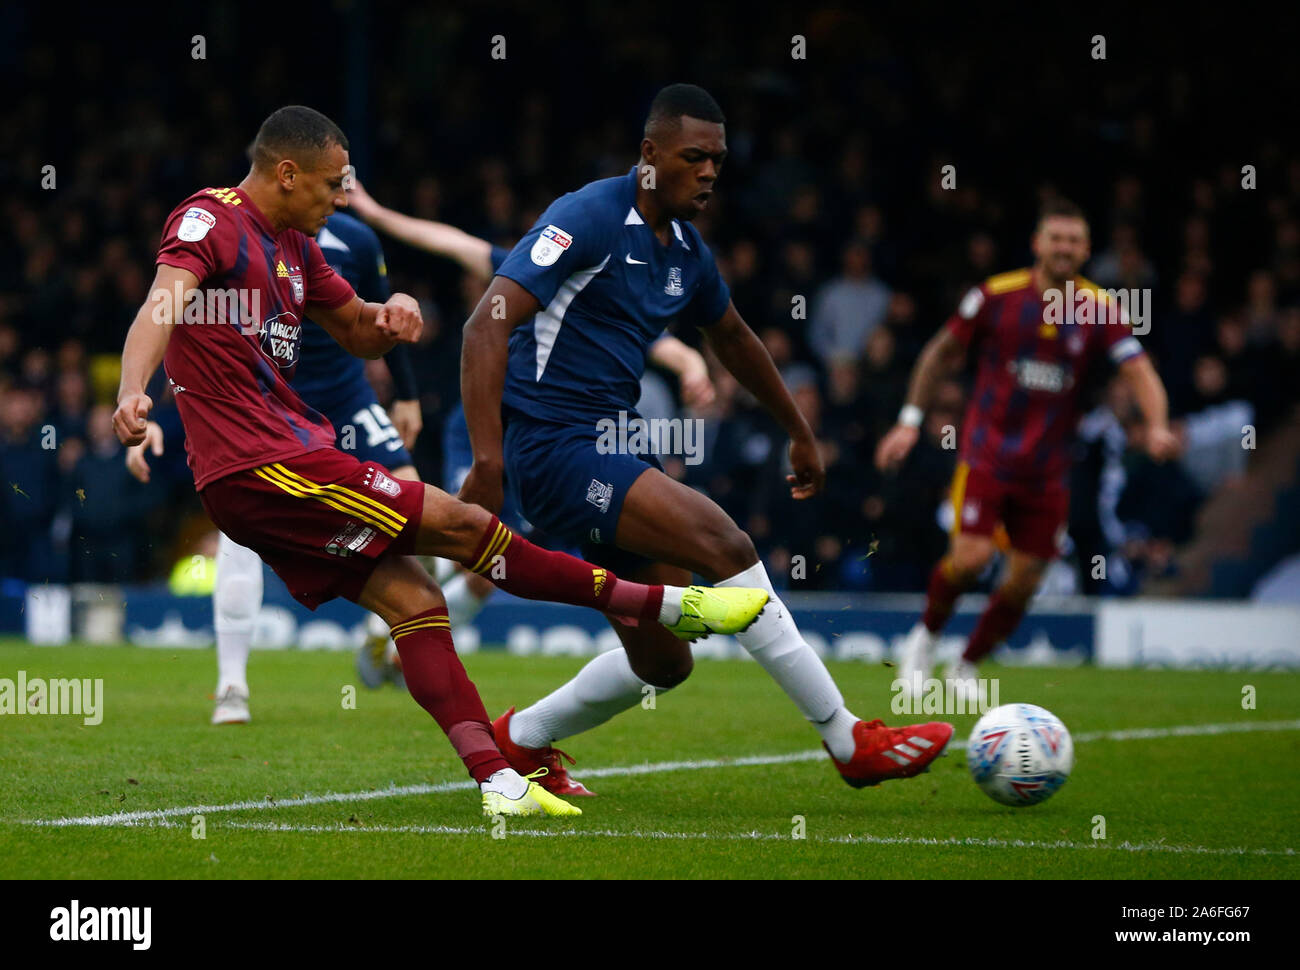 SOUTHEND UNITED KINGDOM. OCTOBER 26 Ipswich Town's Kayden Jackson scores during English Sky Bet League One between Southend United and Ipswich Town at Roots Hall Stadium, Southend, England on 26 October 2019 Credit: Action Foto Sport/Alamy Live News Stock Photo